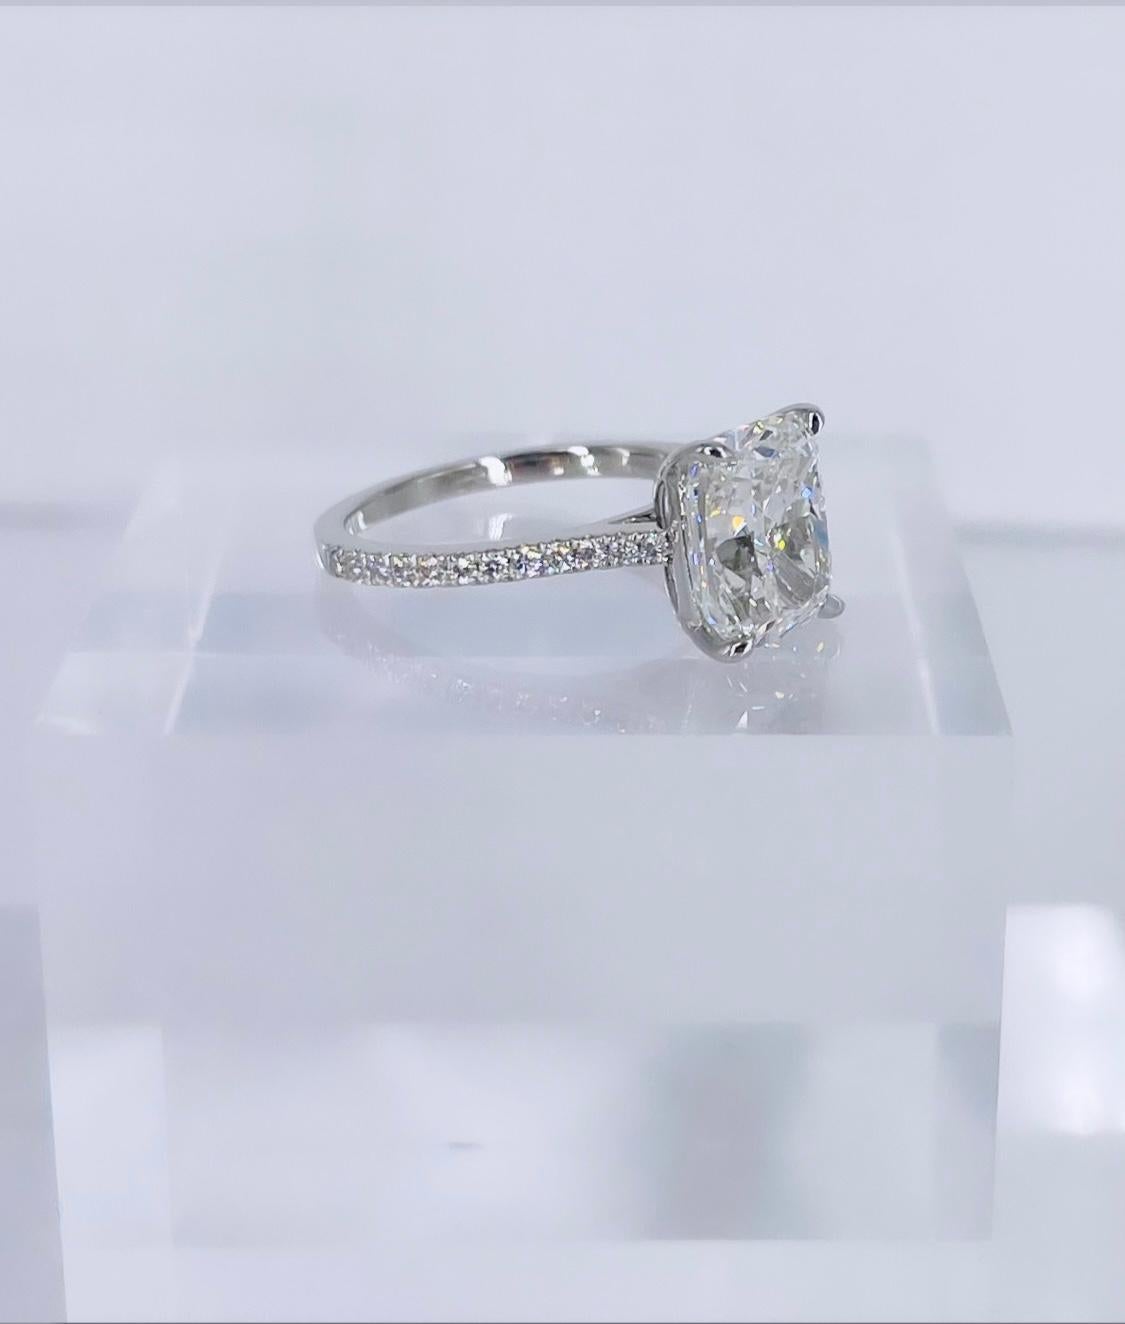 This feminine  engagement ring features one of our most popular shapes, an exceptionally elongated cushion. The diamond is certified by GIA to be I color and VS2 clarity. It is white, bright, and extremely lively and brilliant. It is difficult to